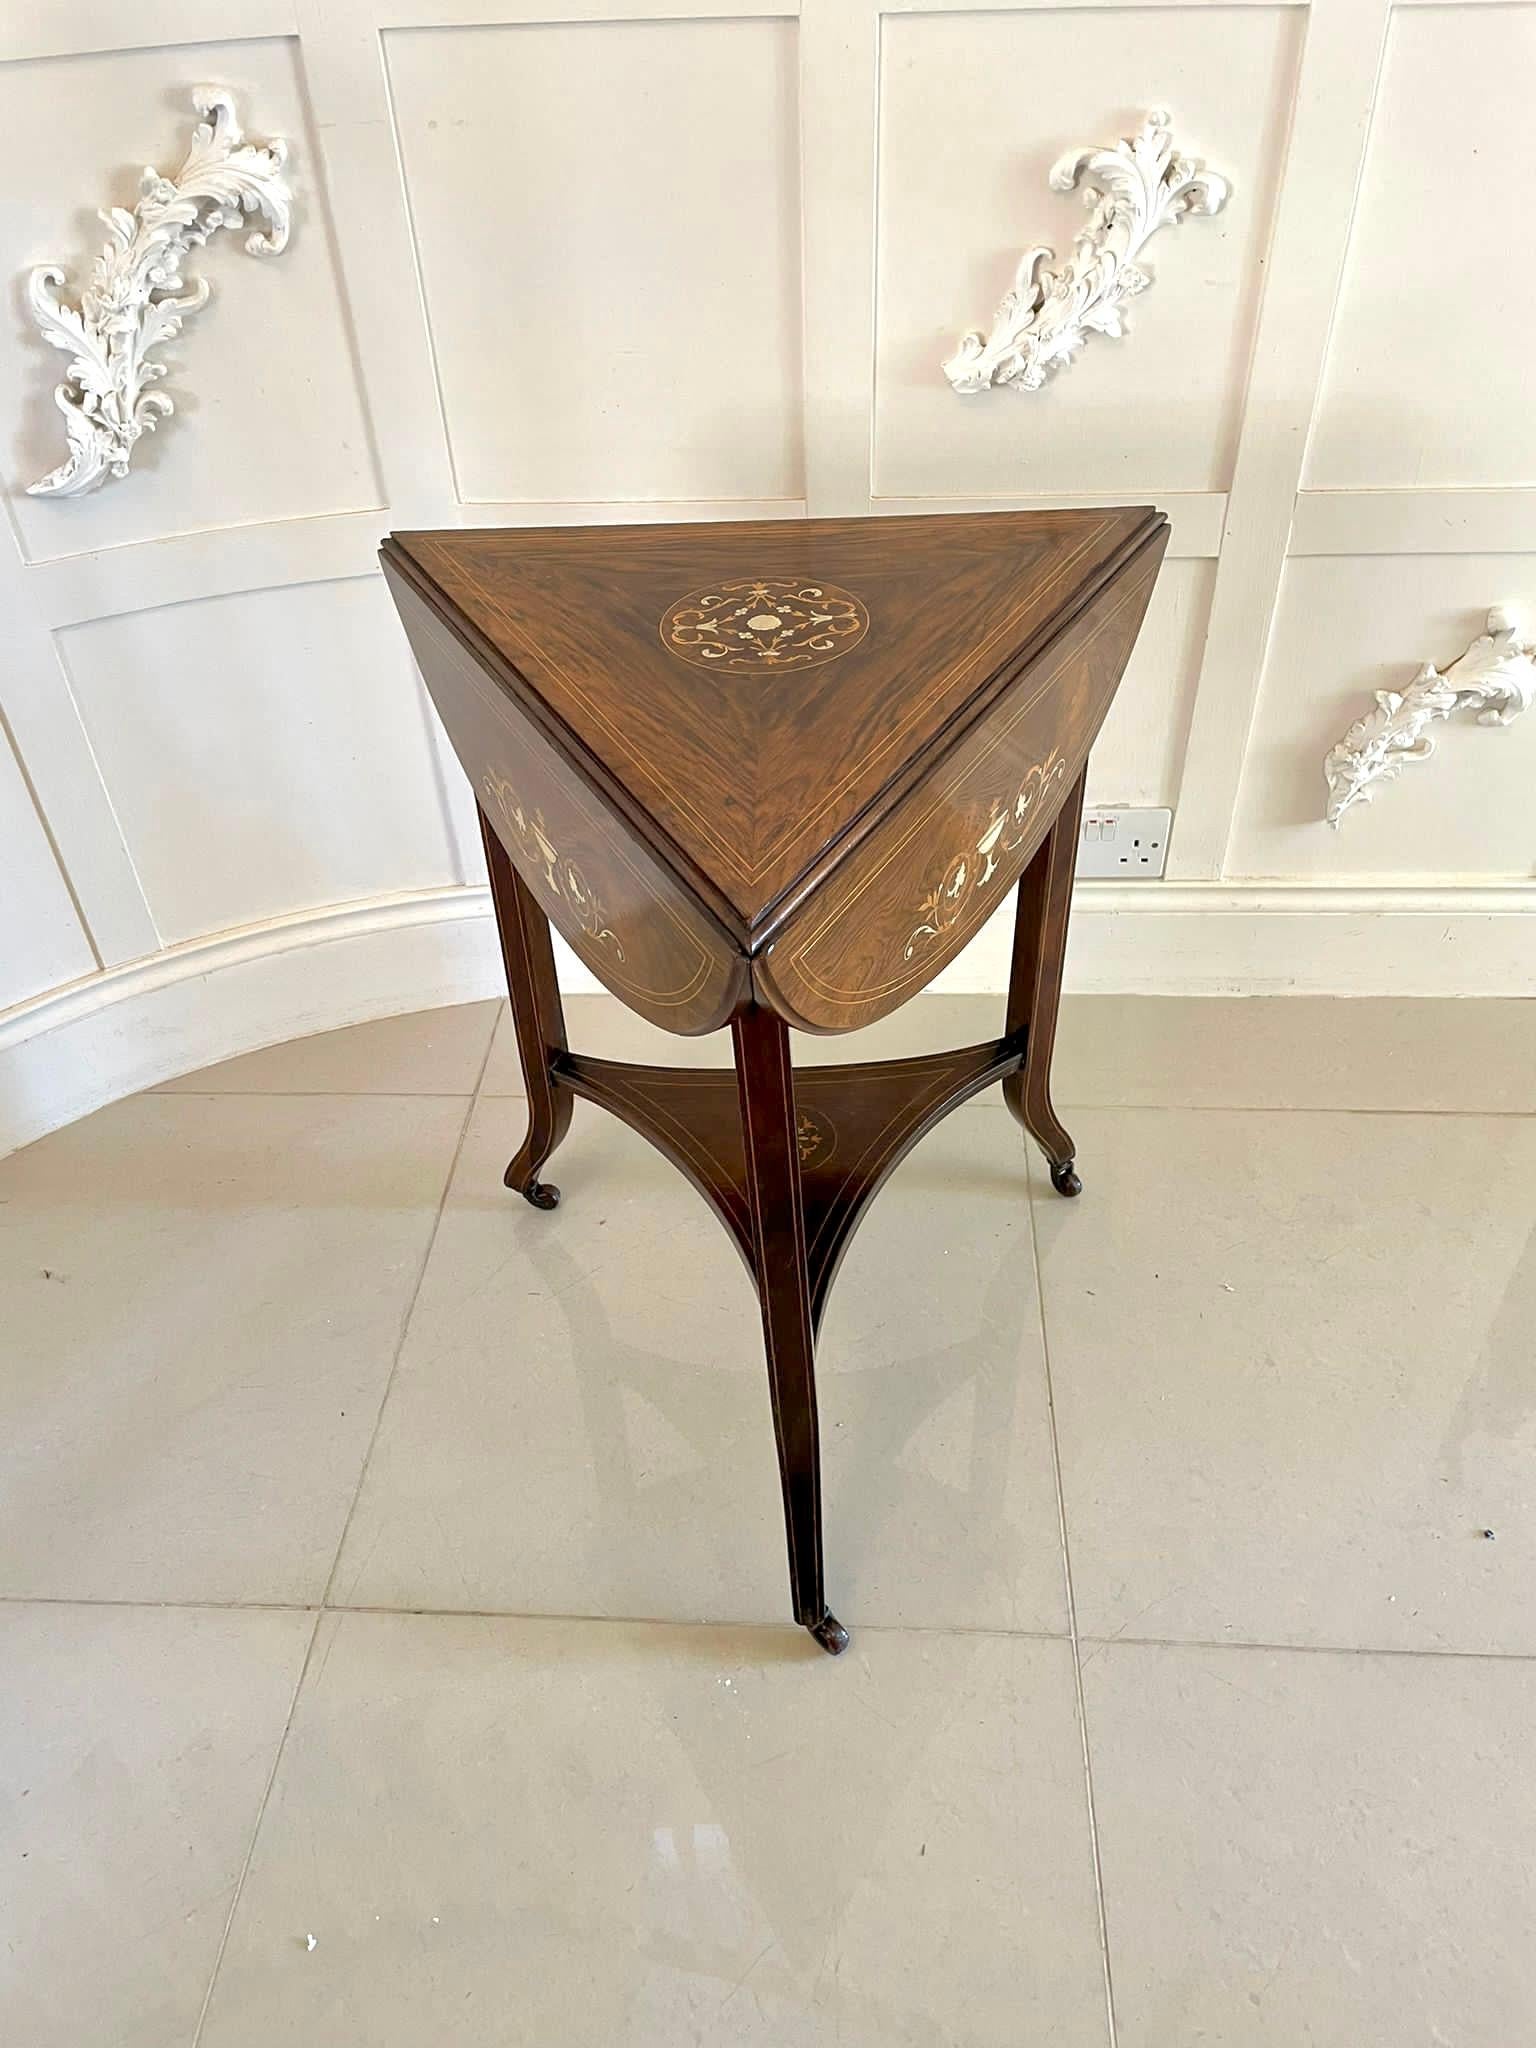 English Unusual Antique Edwardian Quality Rosewood Inlaid Drop Leaf Centre Table For Sale